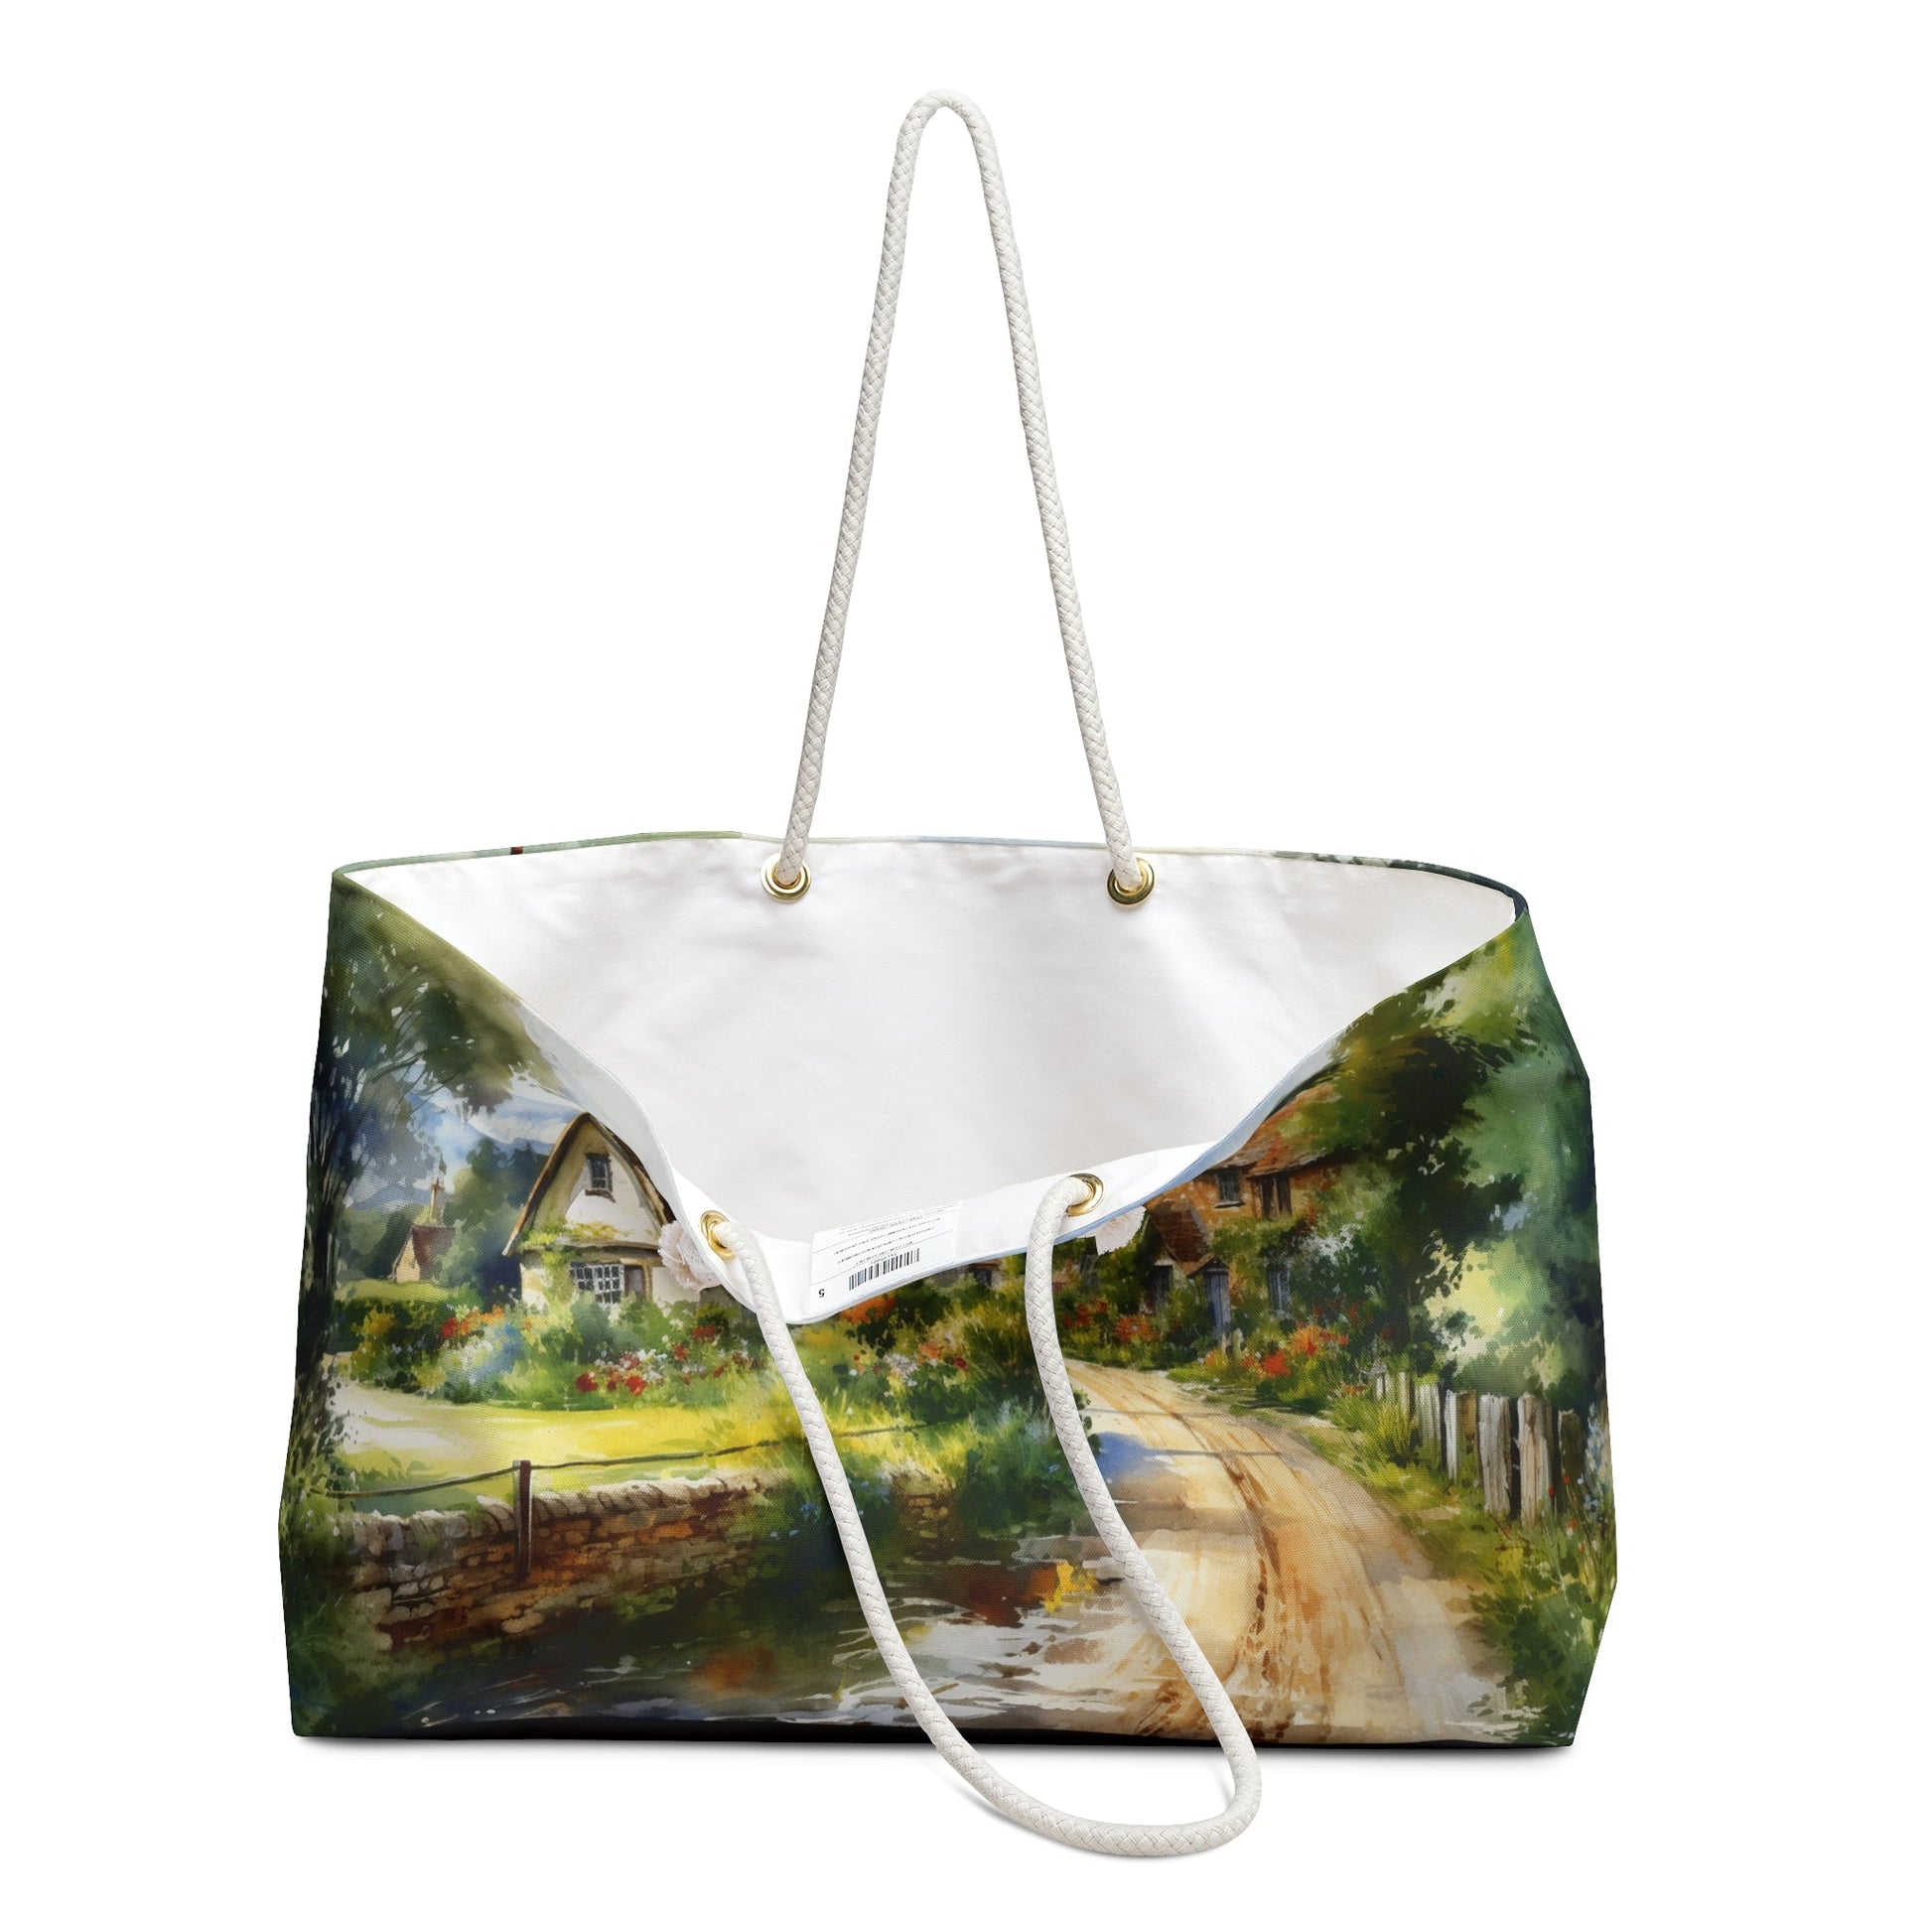 Womens Traveler Tote, Elegant Watercolor Cottages - "The Road Less Traveled", Personalize, Unique Art Work, Mom, Aunt, Grandmother Gift - FlooredByArt